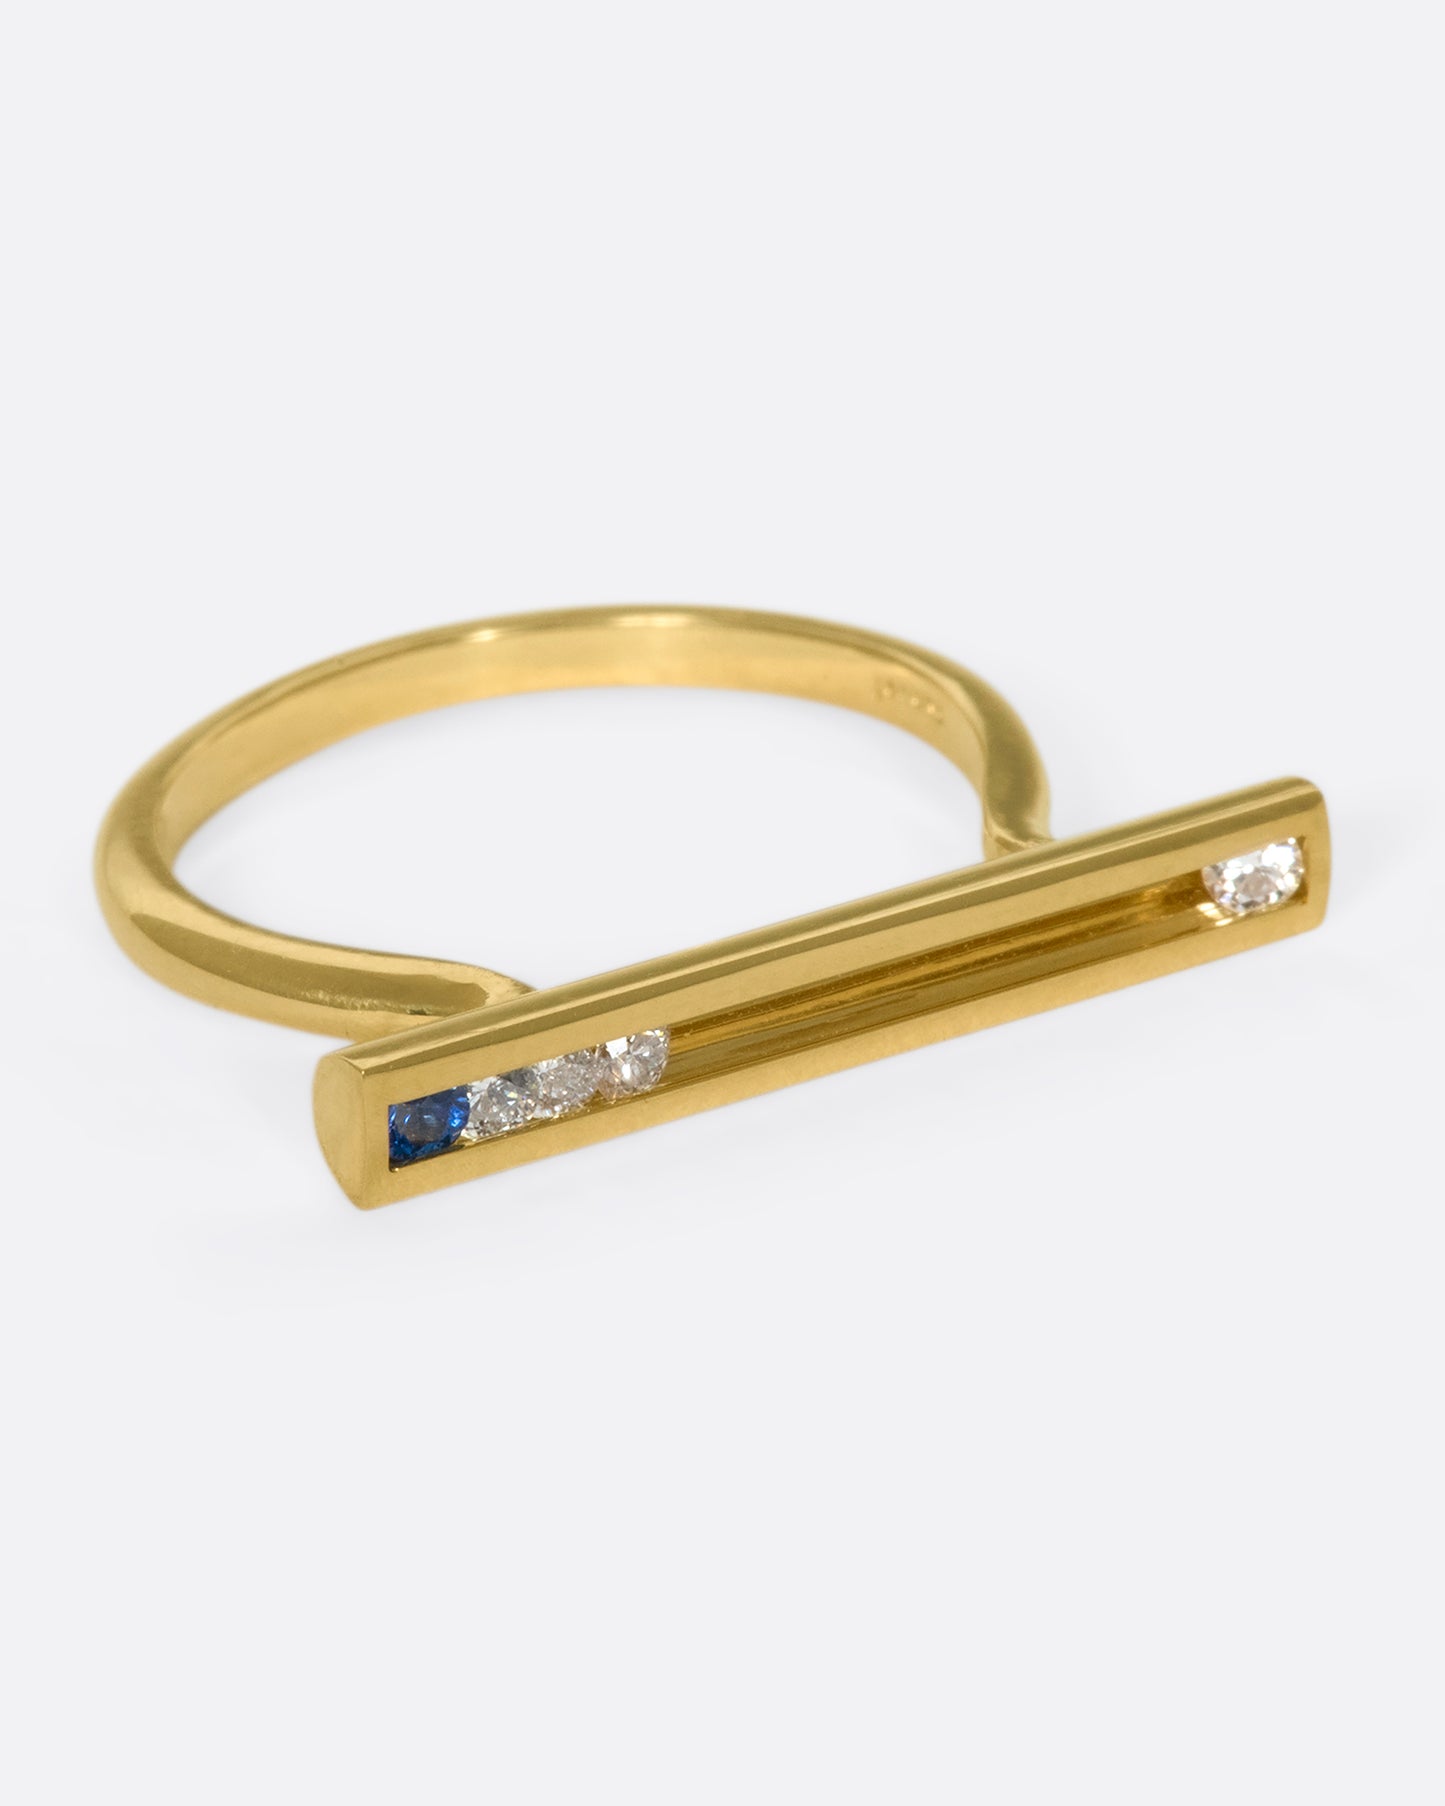 A flat-face ring with blue sapphires and diamonds that glide across an 18K gold bar.